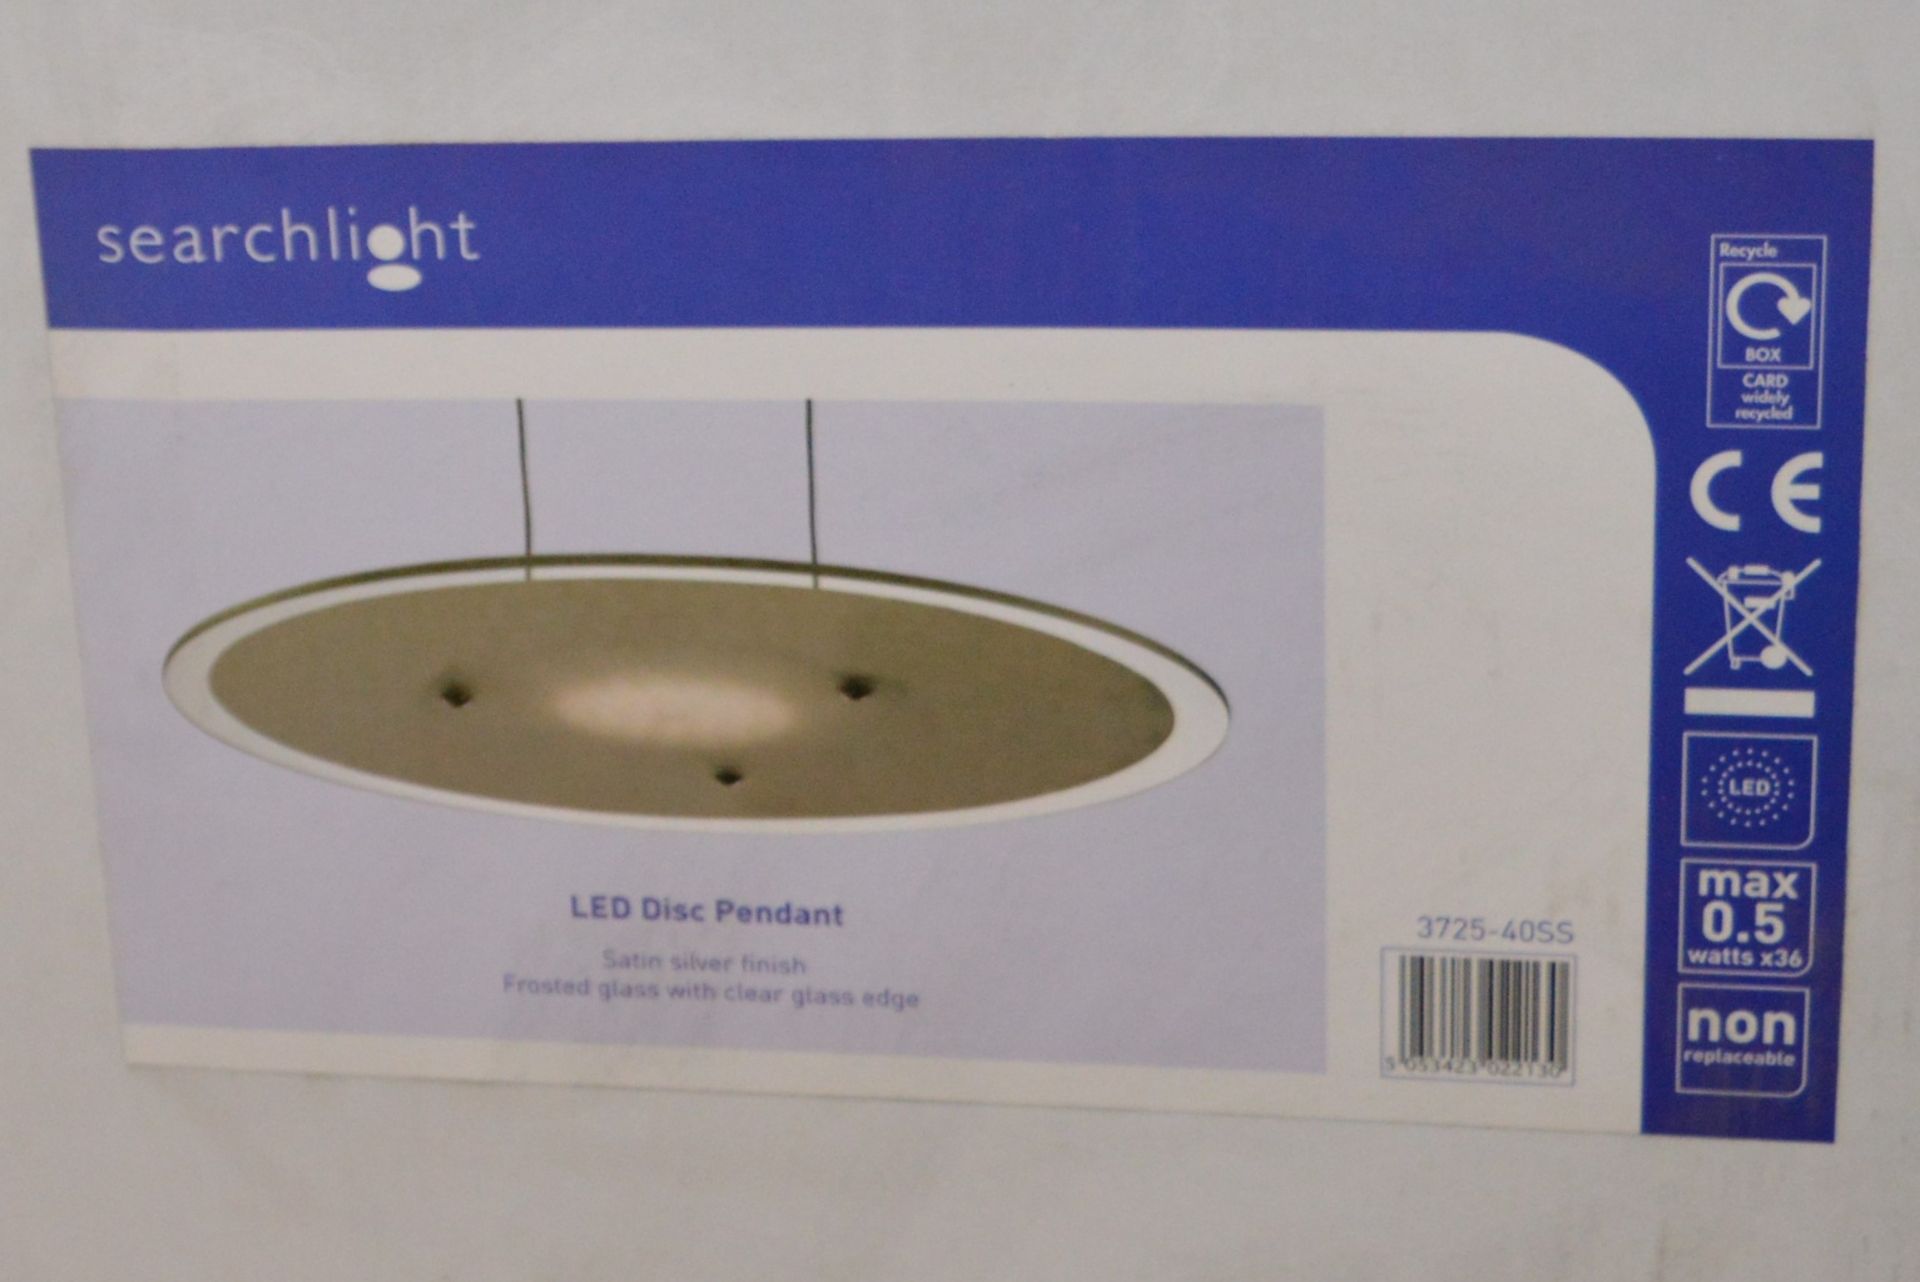 1 x Searchlight 3725-40SS 35 Light LED Ceiling Pendant Satin Silver - Brand New and Boxed - Ref L5 -